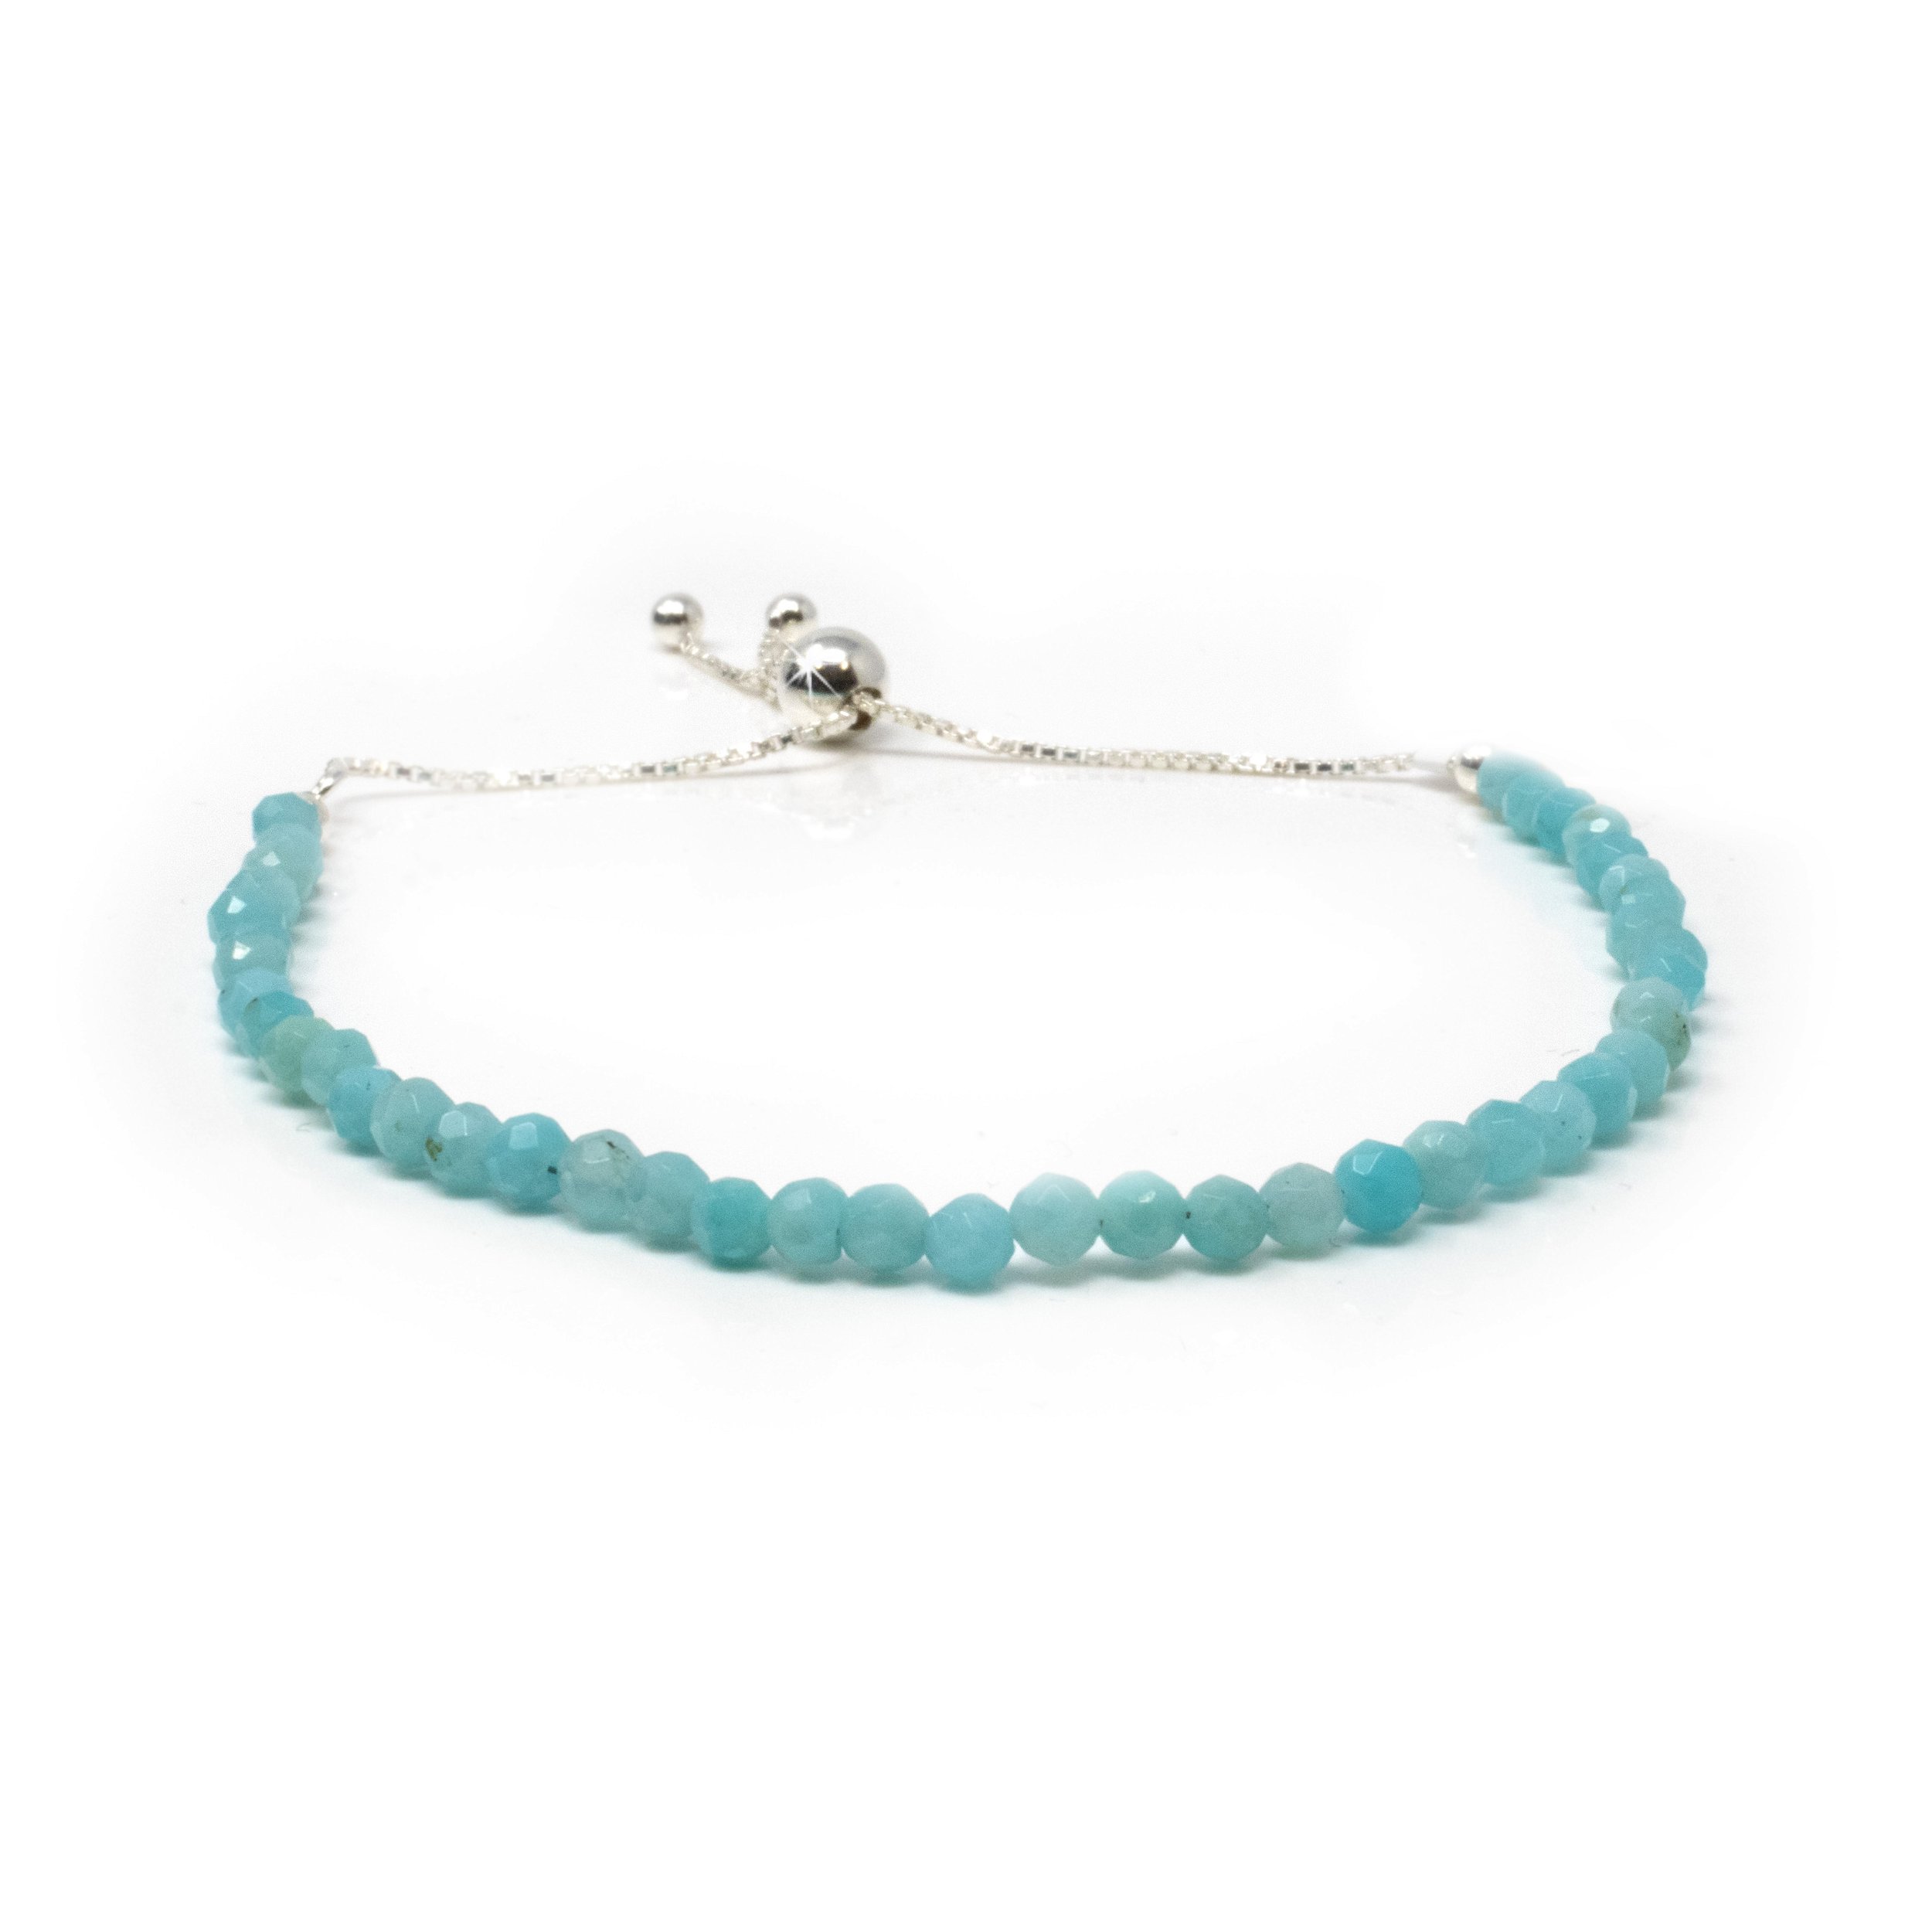 Amazonite Beaded Bracelet - Faceted Bicone Beads With 925 Sterling Silver Adjustable Ball & Chain